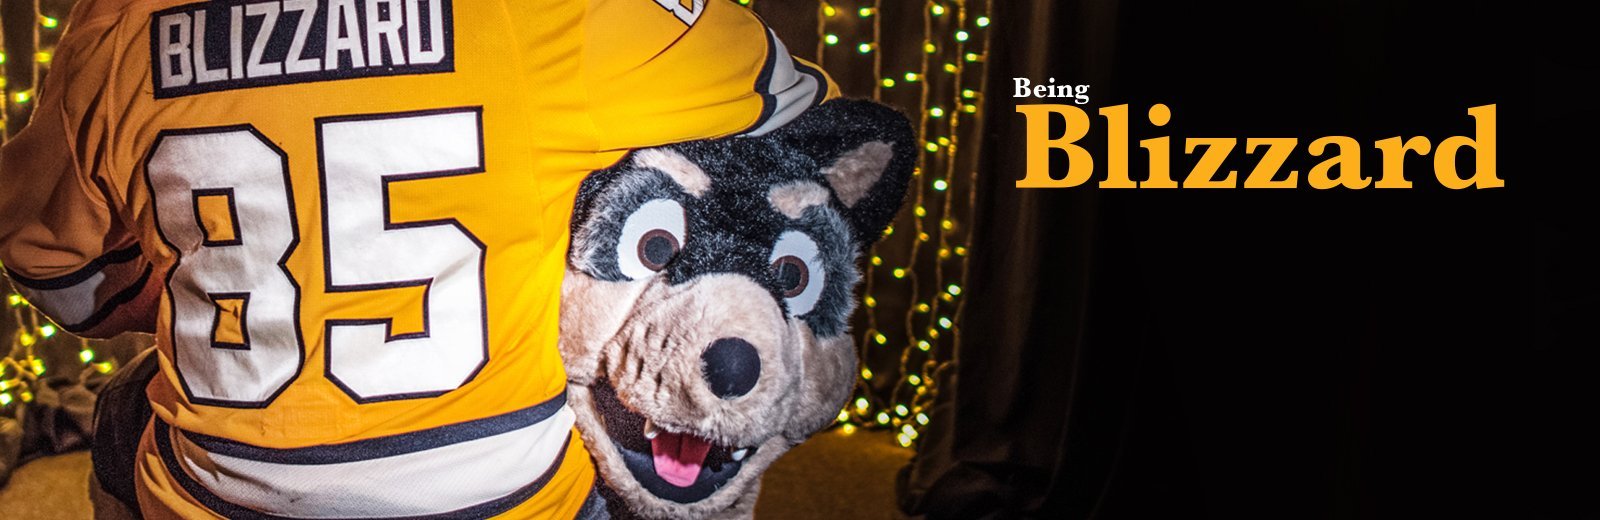 What's life really like for those anonymous few who become Michigan Tech's famous mascot?